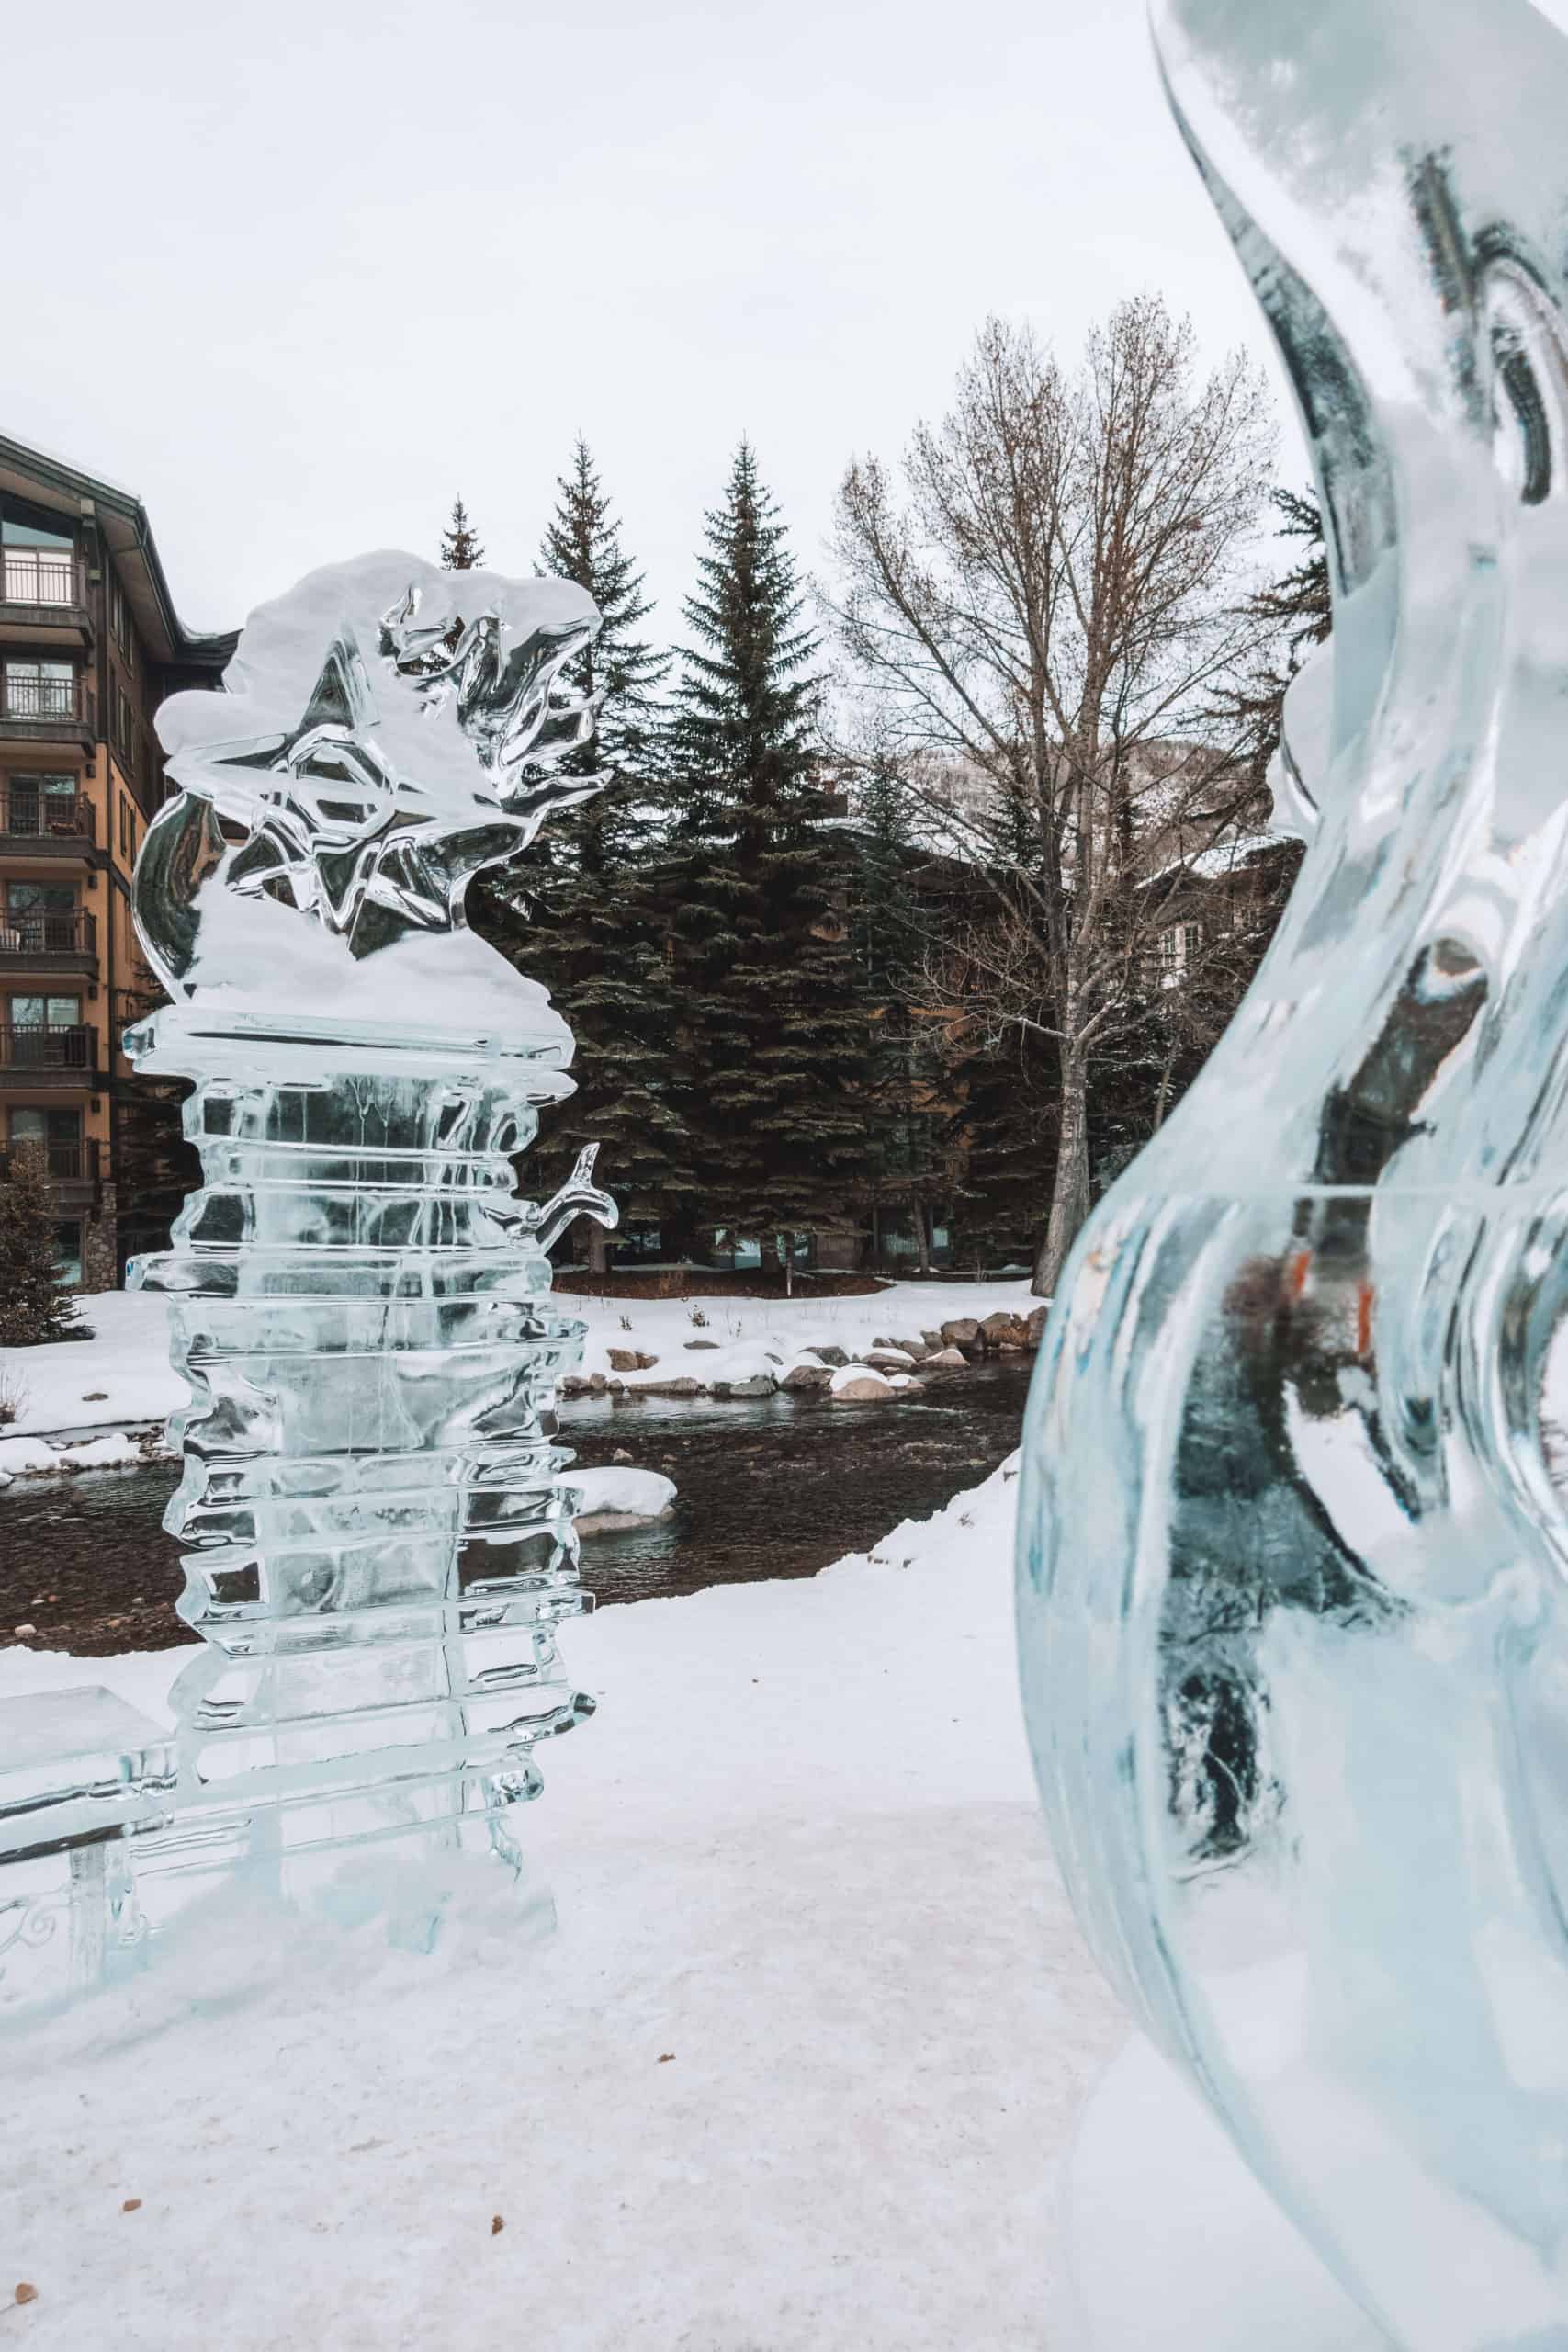 Ice sculptures in Vail | The Ultimate Guide to Vail, Colorado